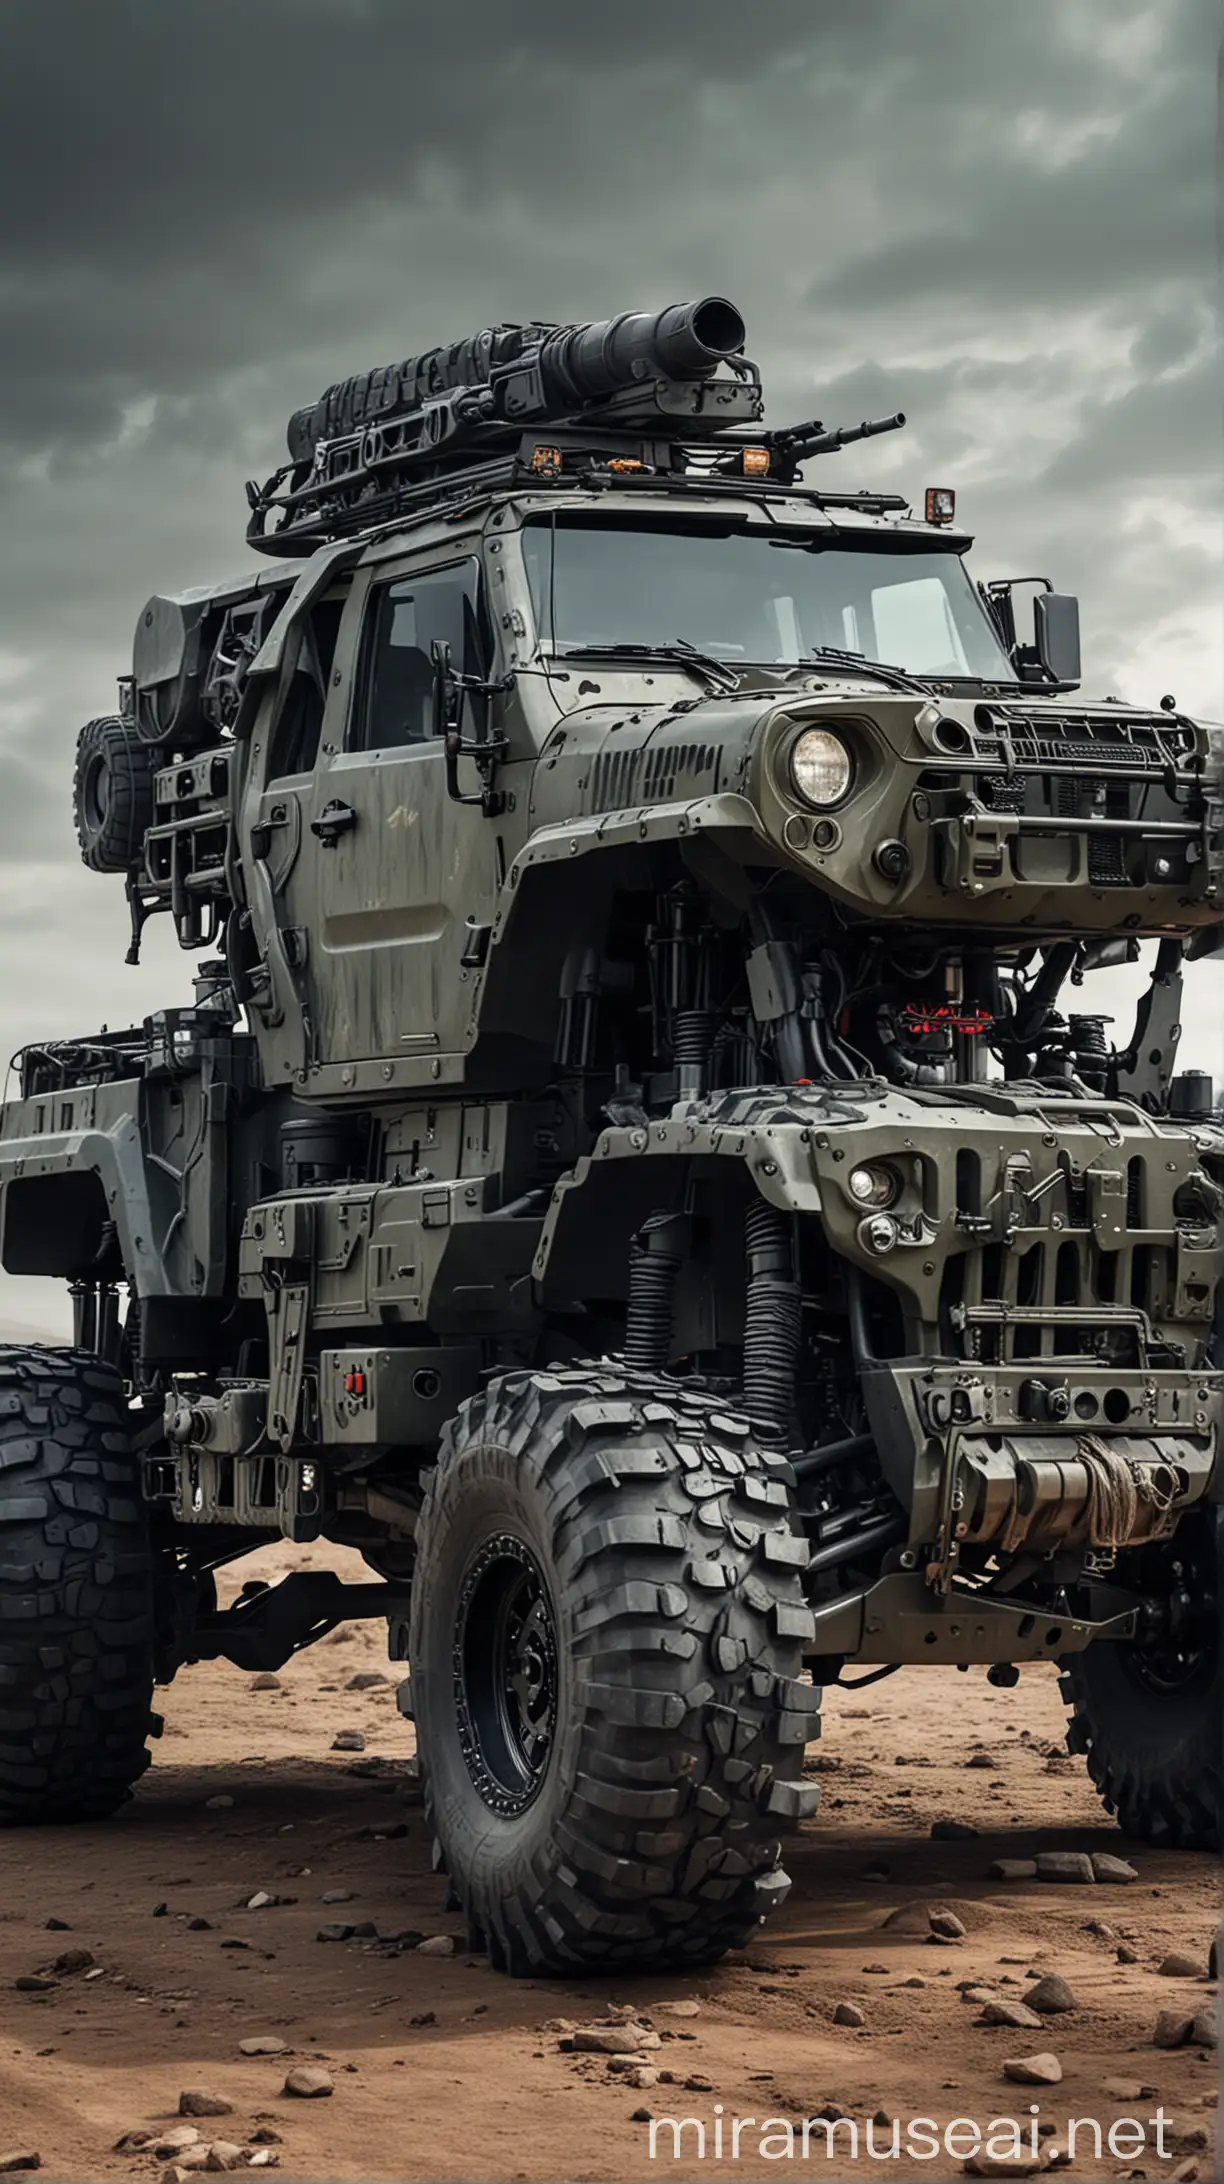 A futuristic jeep, with heavy tyres, sharp knives fitted in tyres, and fitted with machine guns